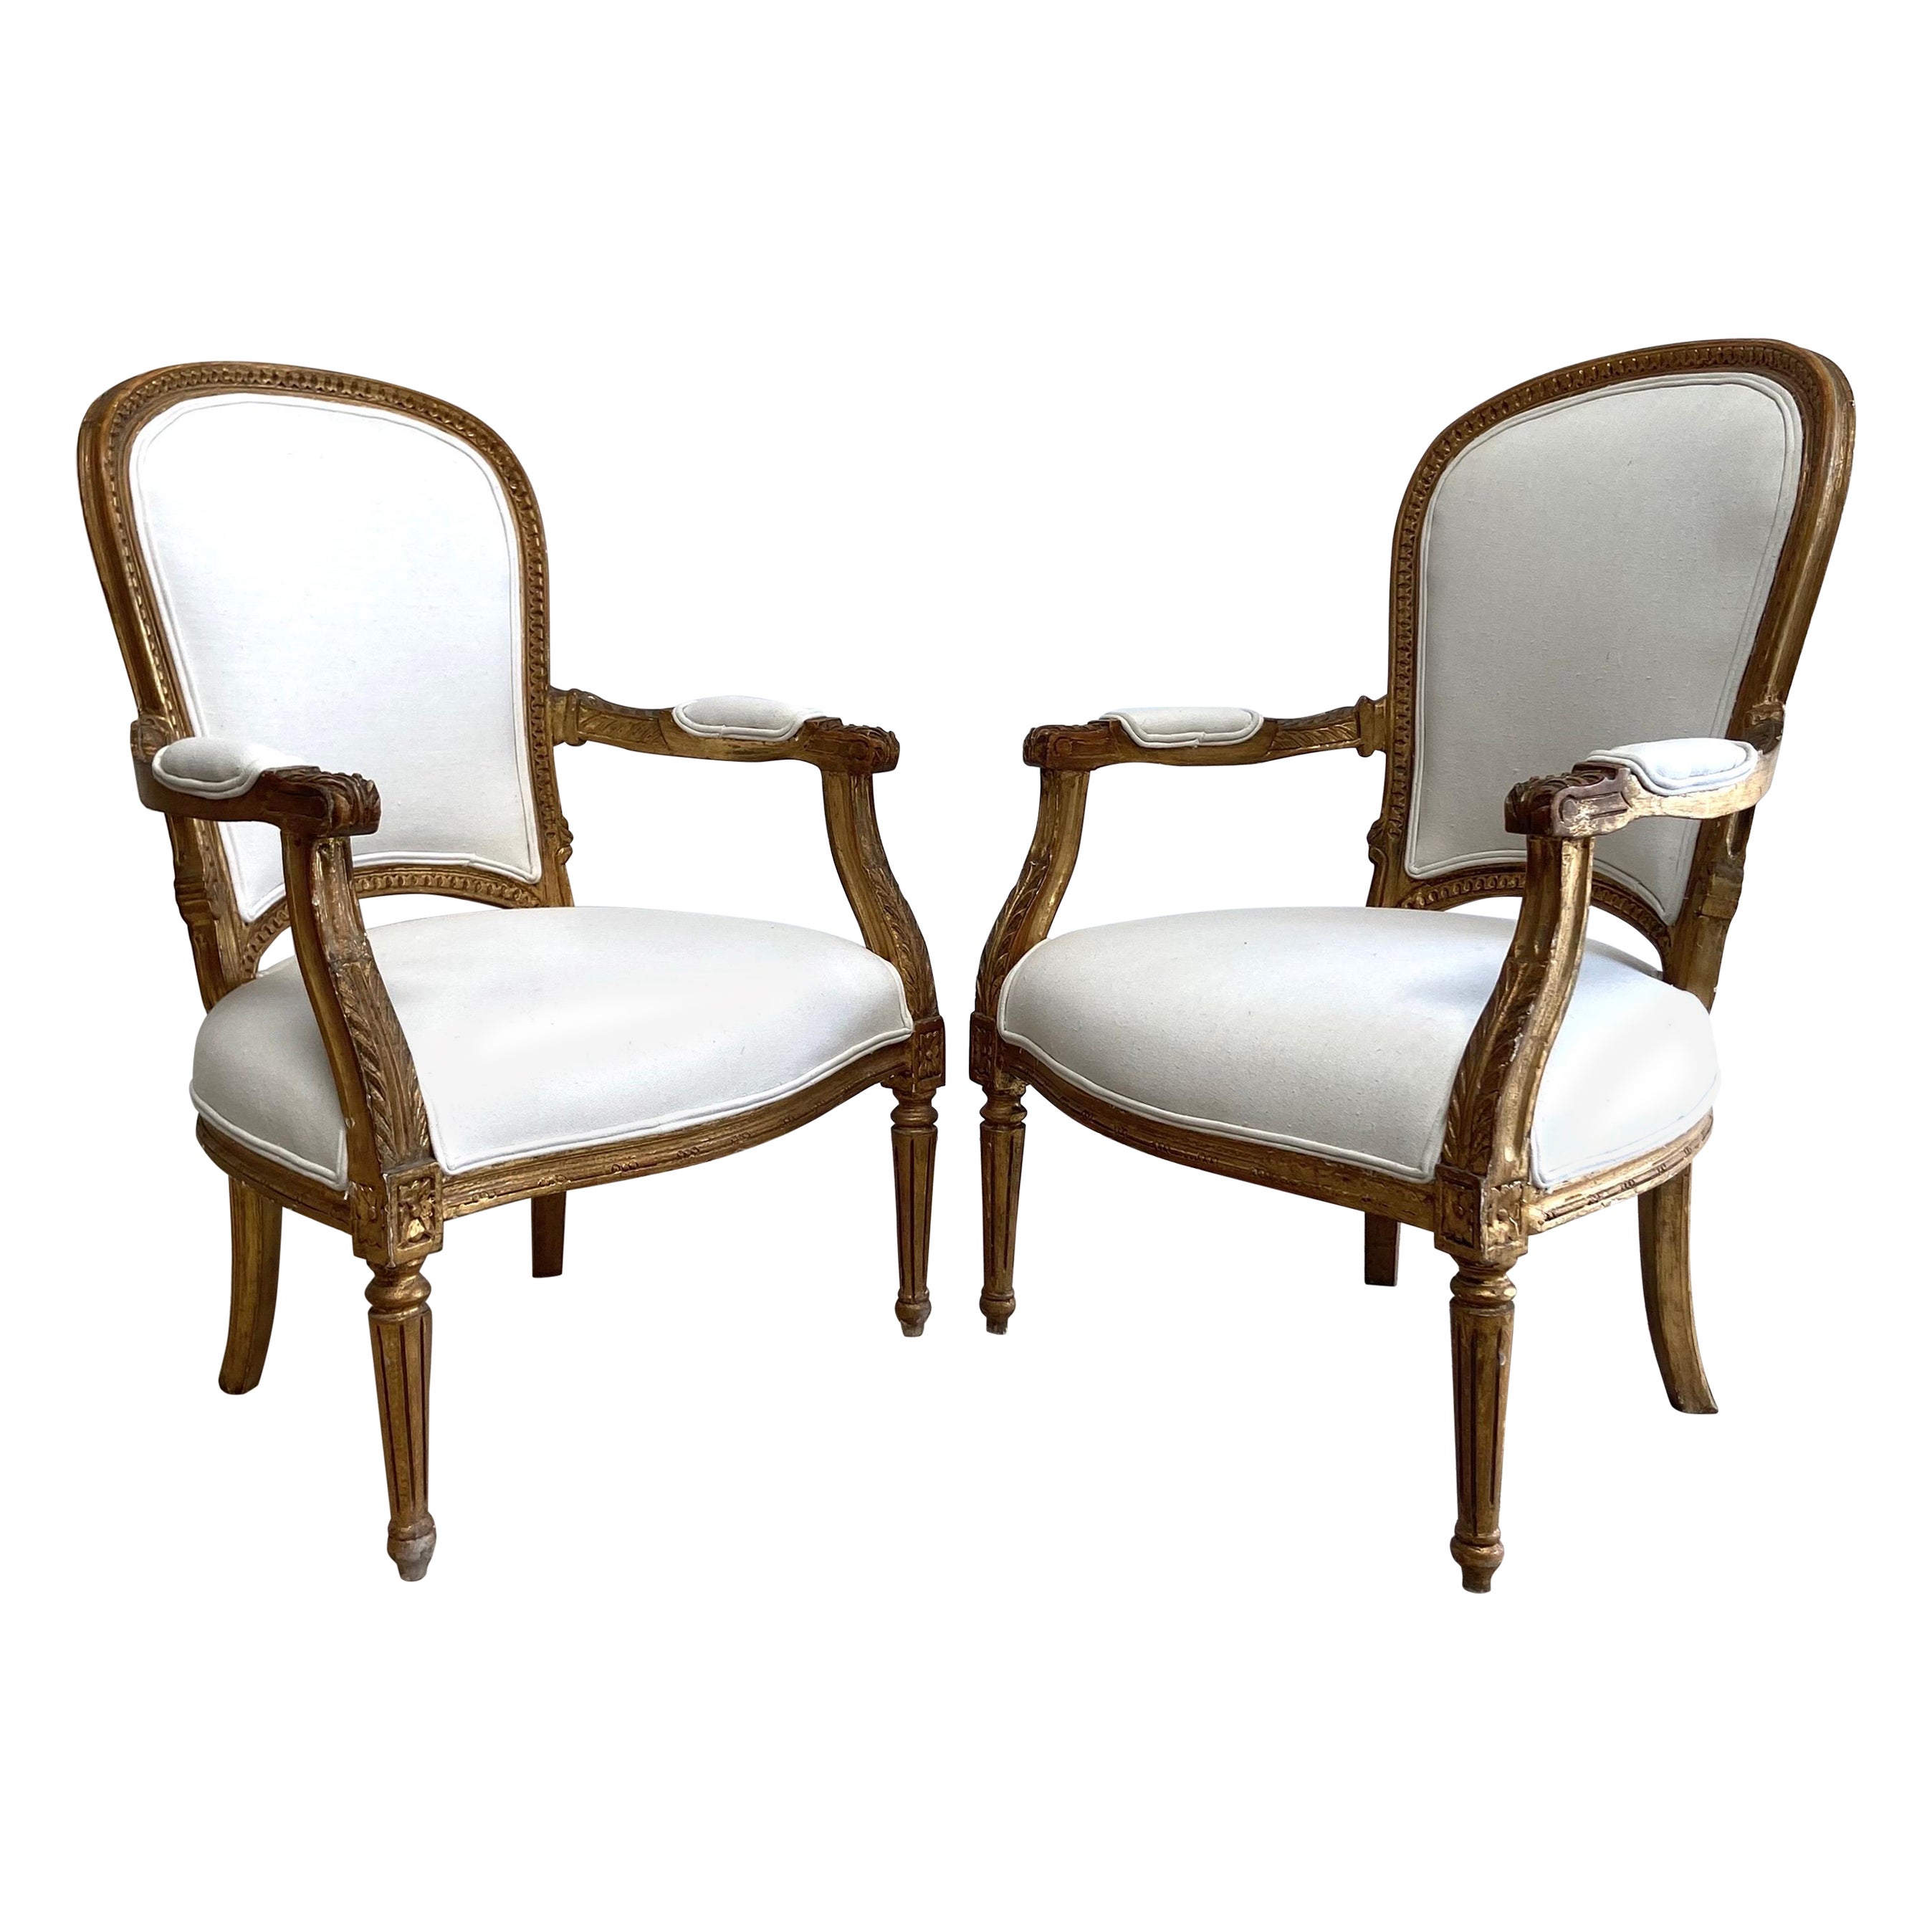 Vintage French Style Louis XVI Open Arm Chairs with Linen Upholstery For Sale